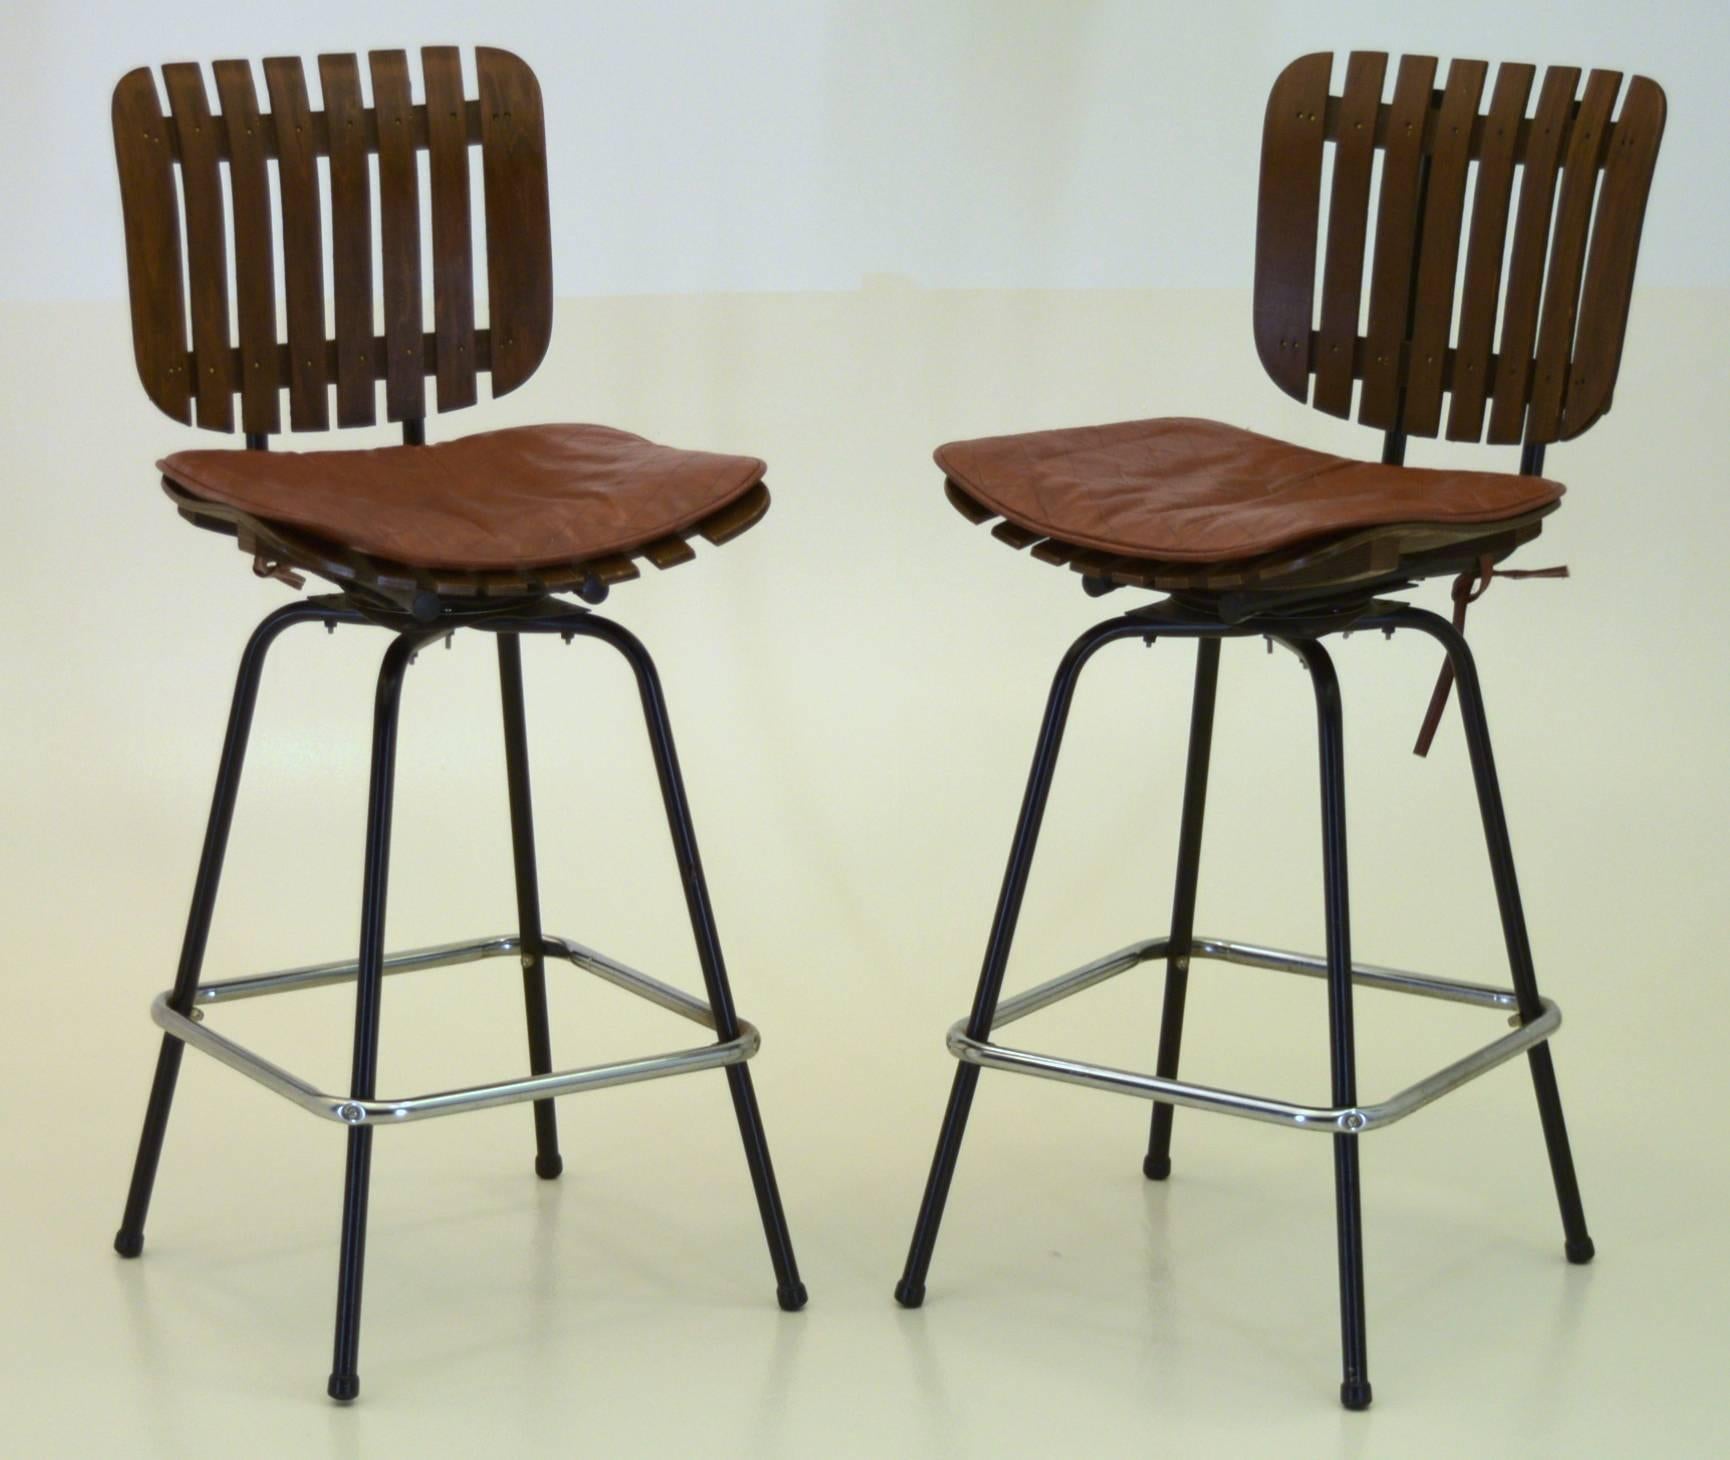 A beautiful trio of well cared for slat bar stools with solid steel frames. This set of three bar stools are in excellent condition and have been very well cared for. The seats come with leather cushions in patchwork that are very practical.

They